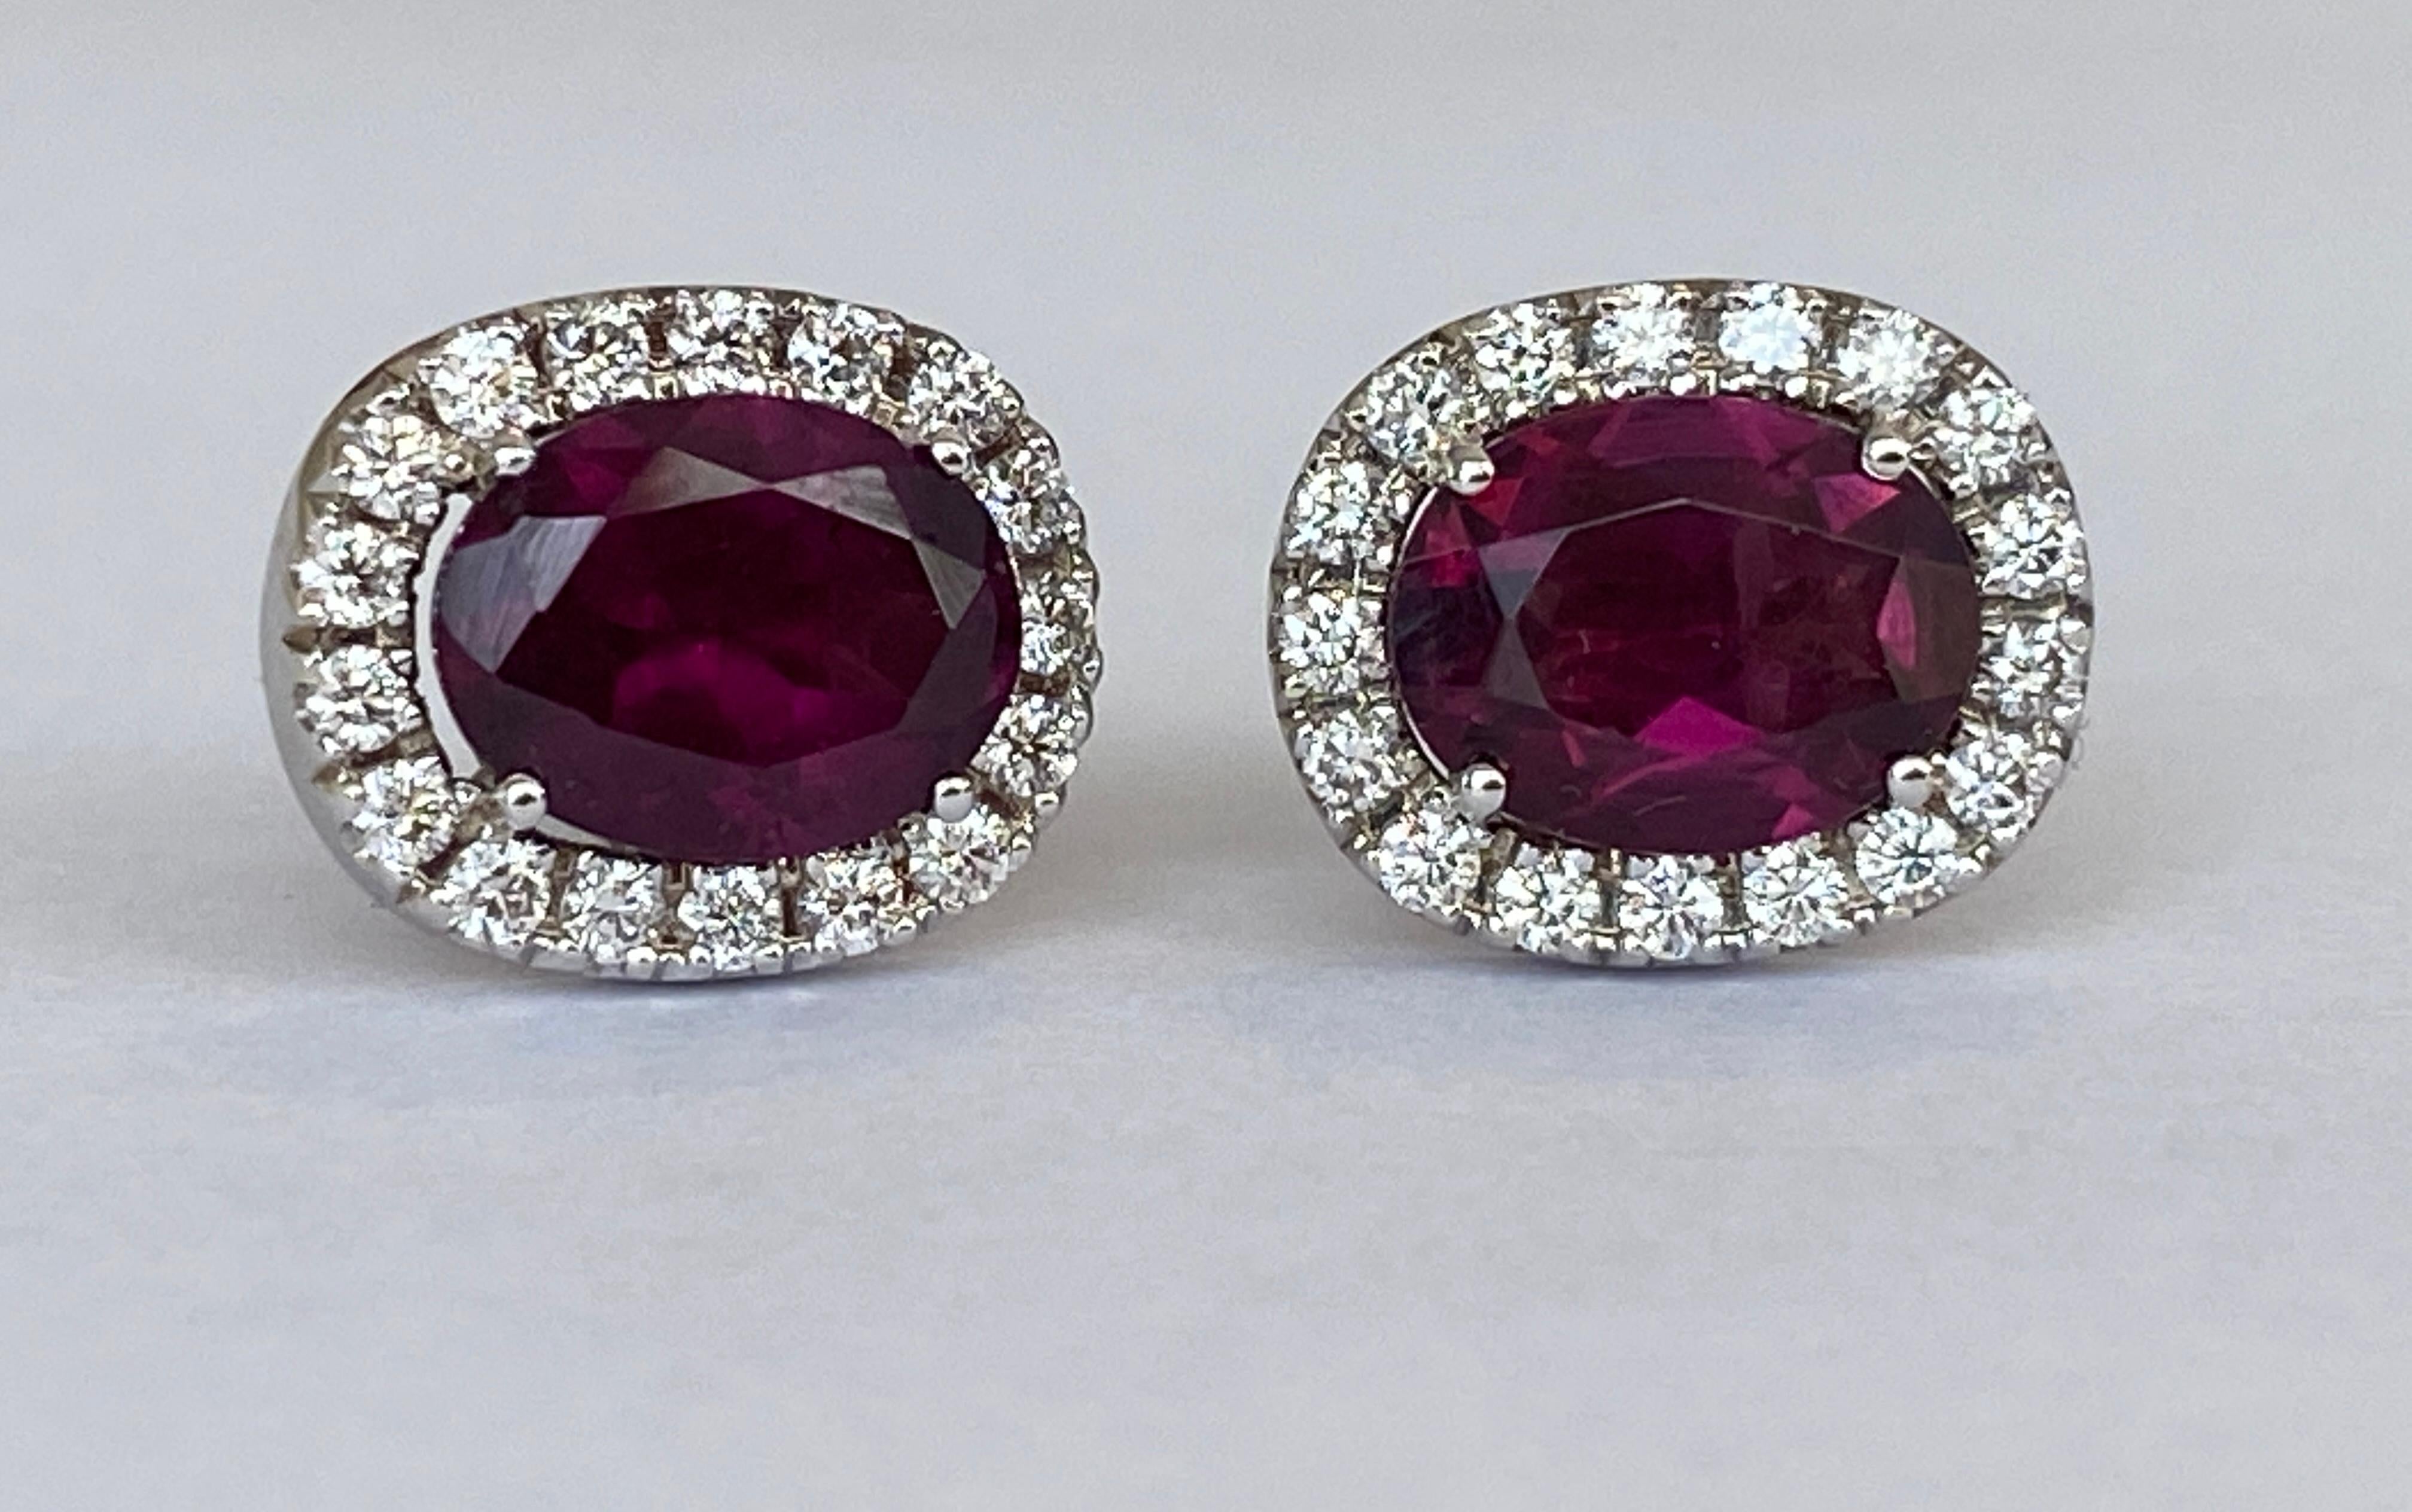 Offered in new condition, stud earrings in white gold, with two pieces of oval cut Red Tourmaline of approx. 4.5 carats together. The stones are surrounded by an entourage of 32 brilliant cut diamonds totaling approx. 0.58 ct of quality G/VS/SI
Gold